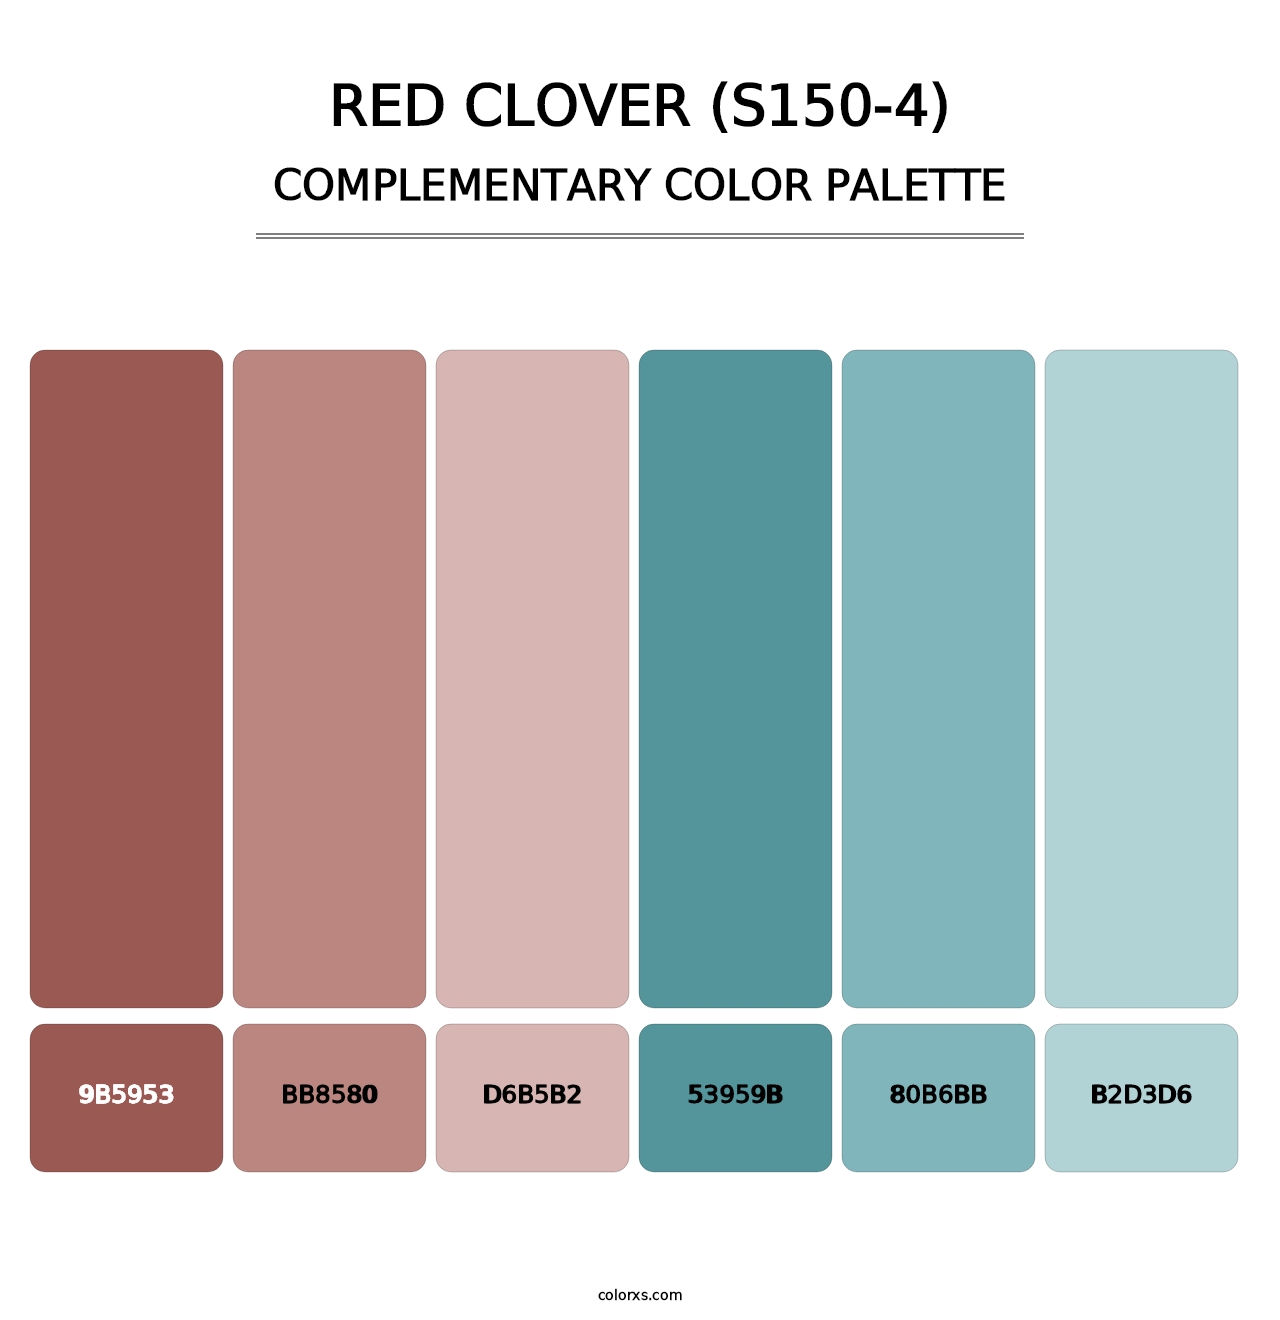 Red Clover (S150-4) - Complementary Color Palette